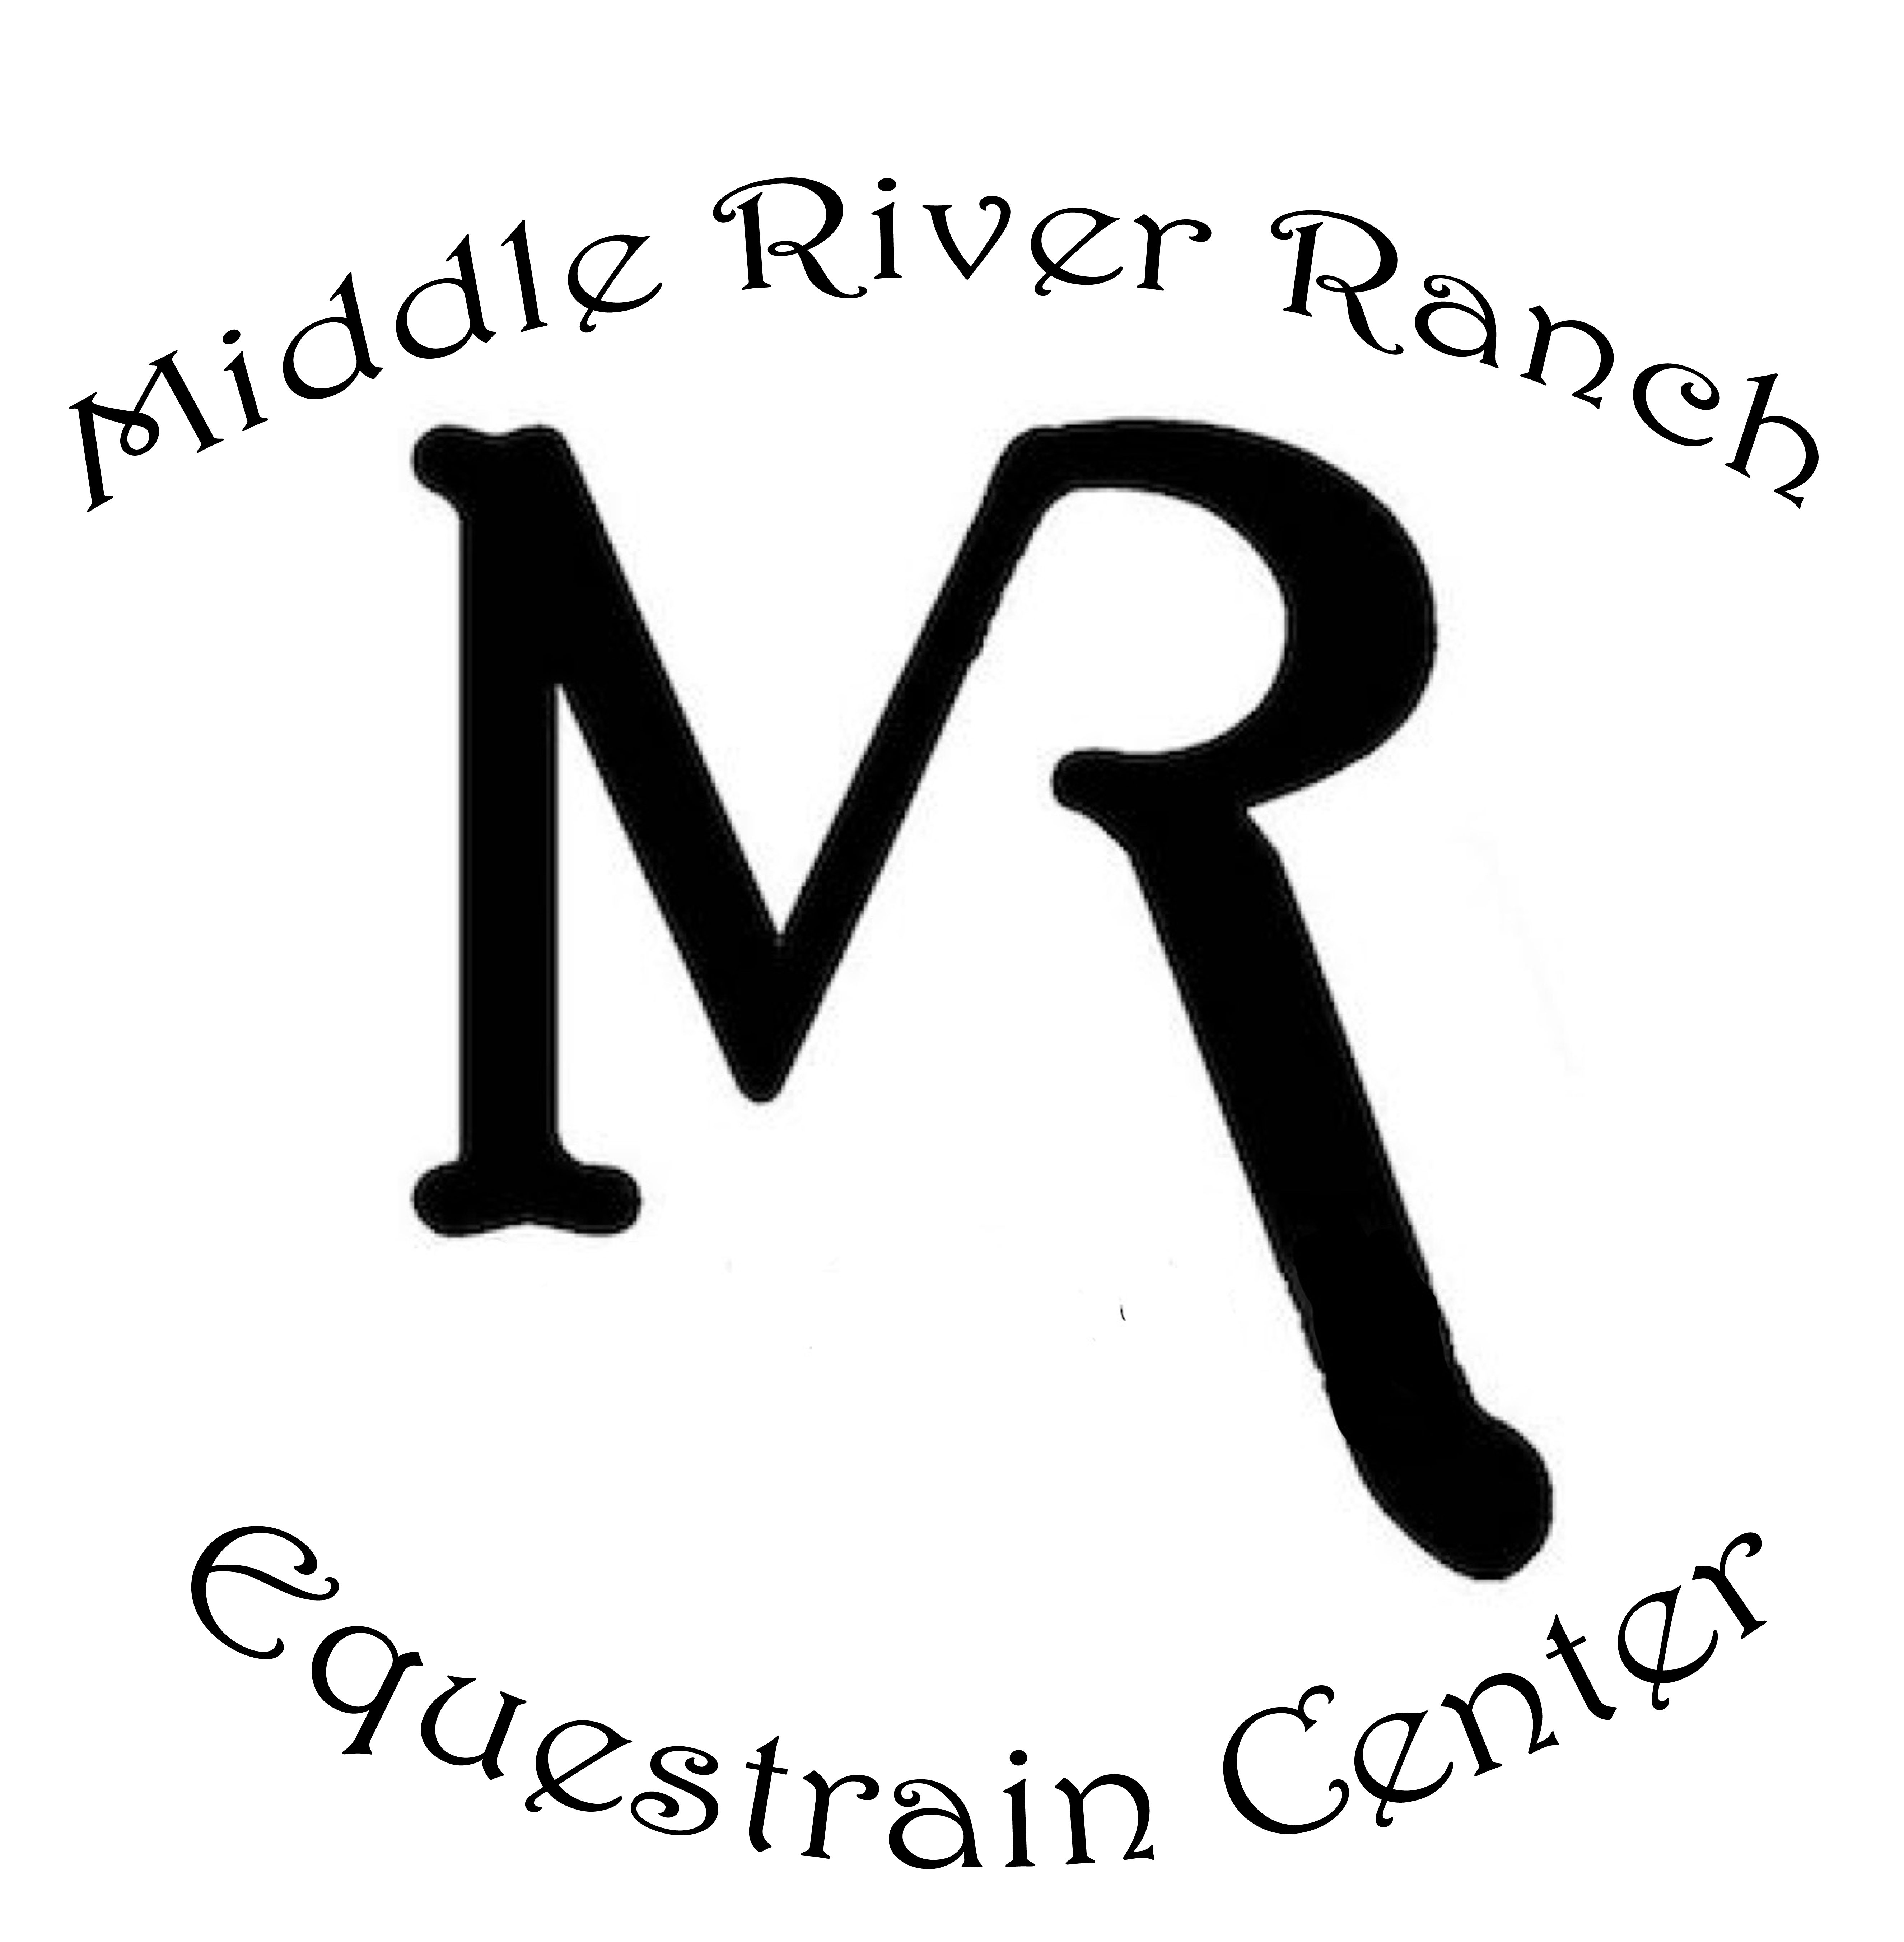 The Middle River Ranch Equestrian Center